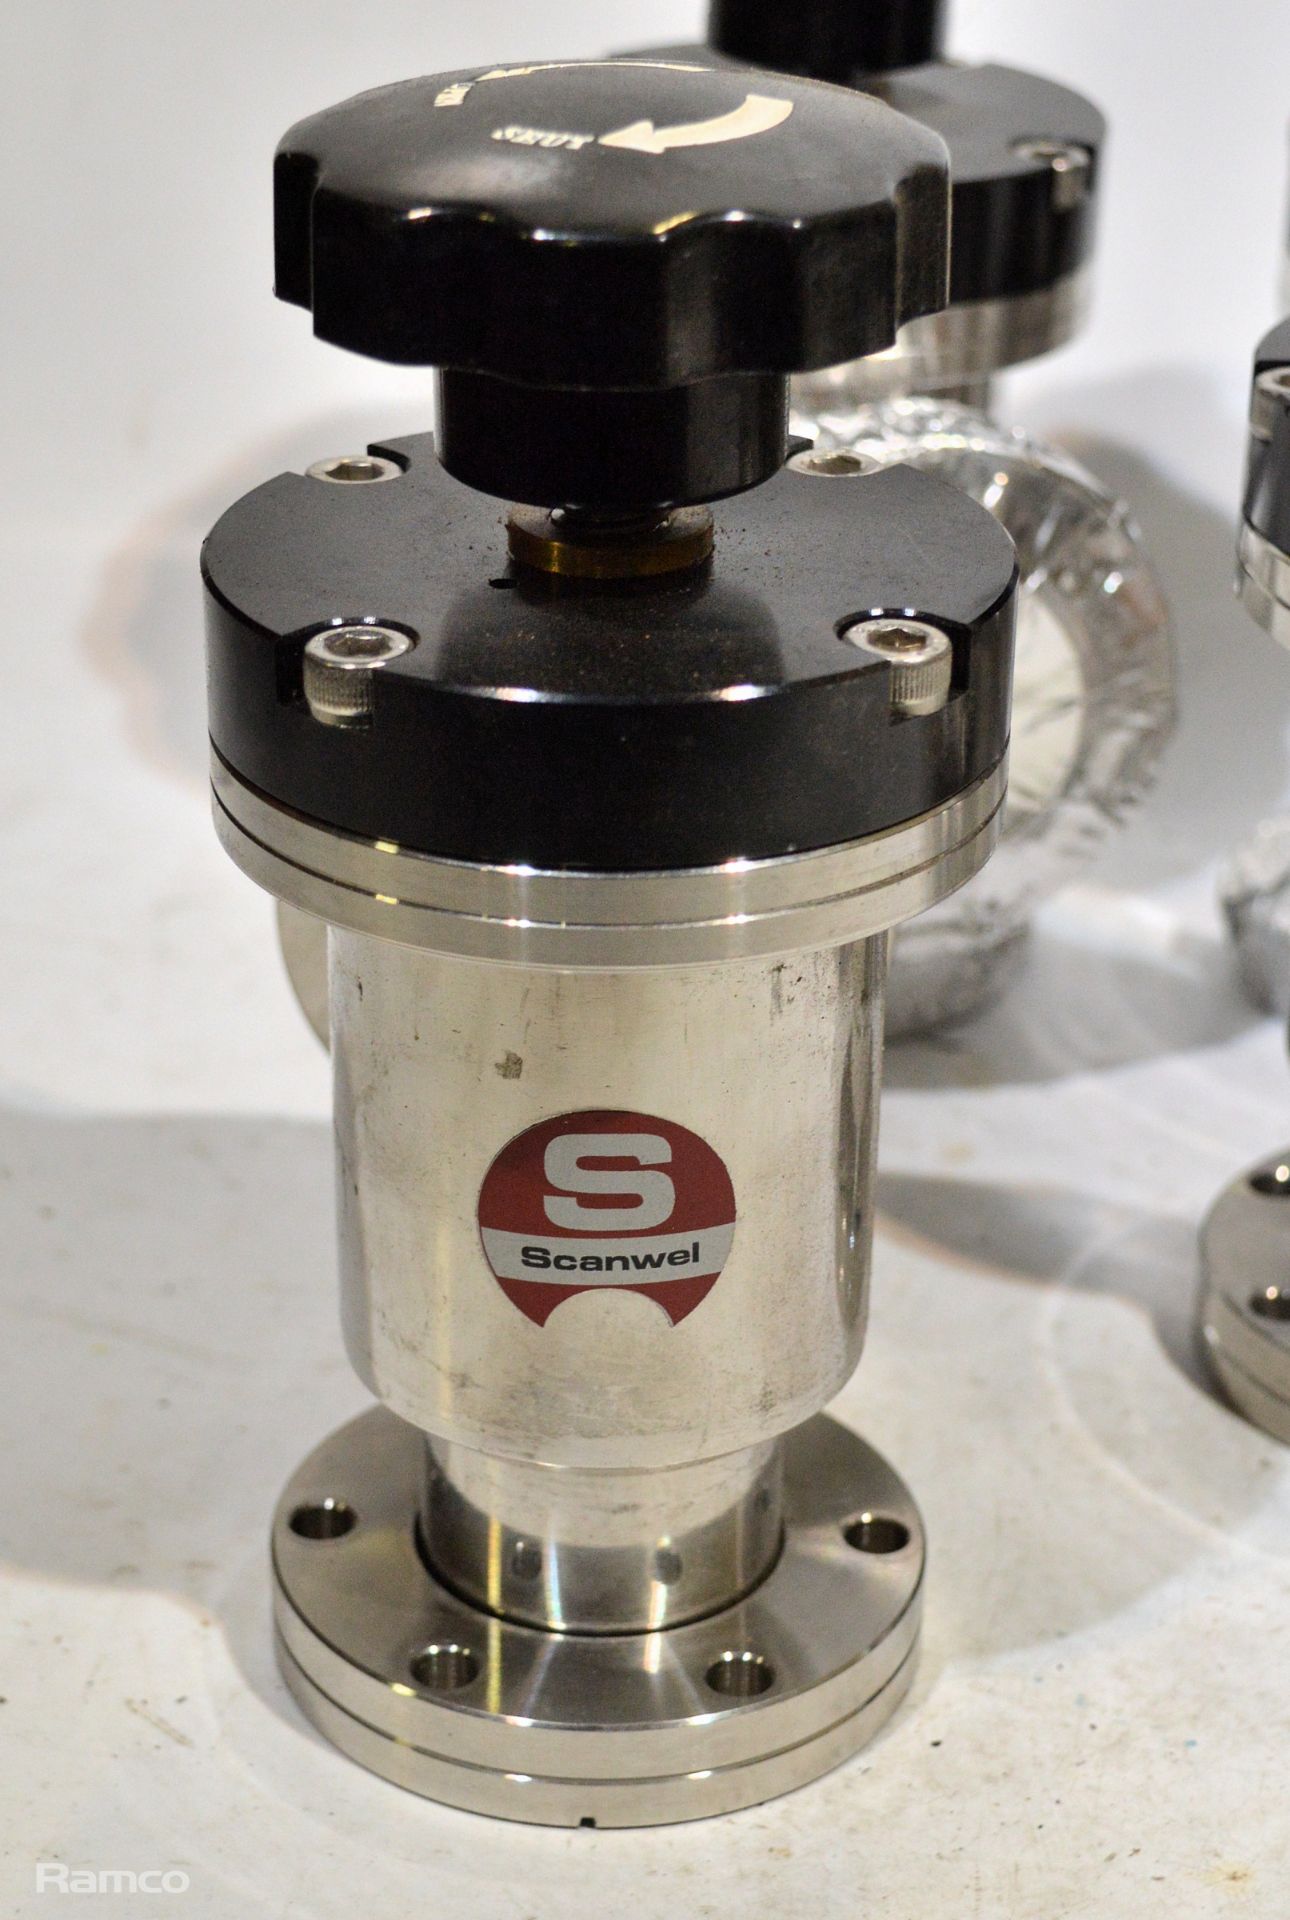 6x Scanwell Conflat Bellows Vacuum Valves - Image 2 of 5